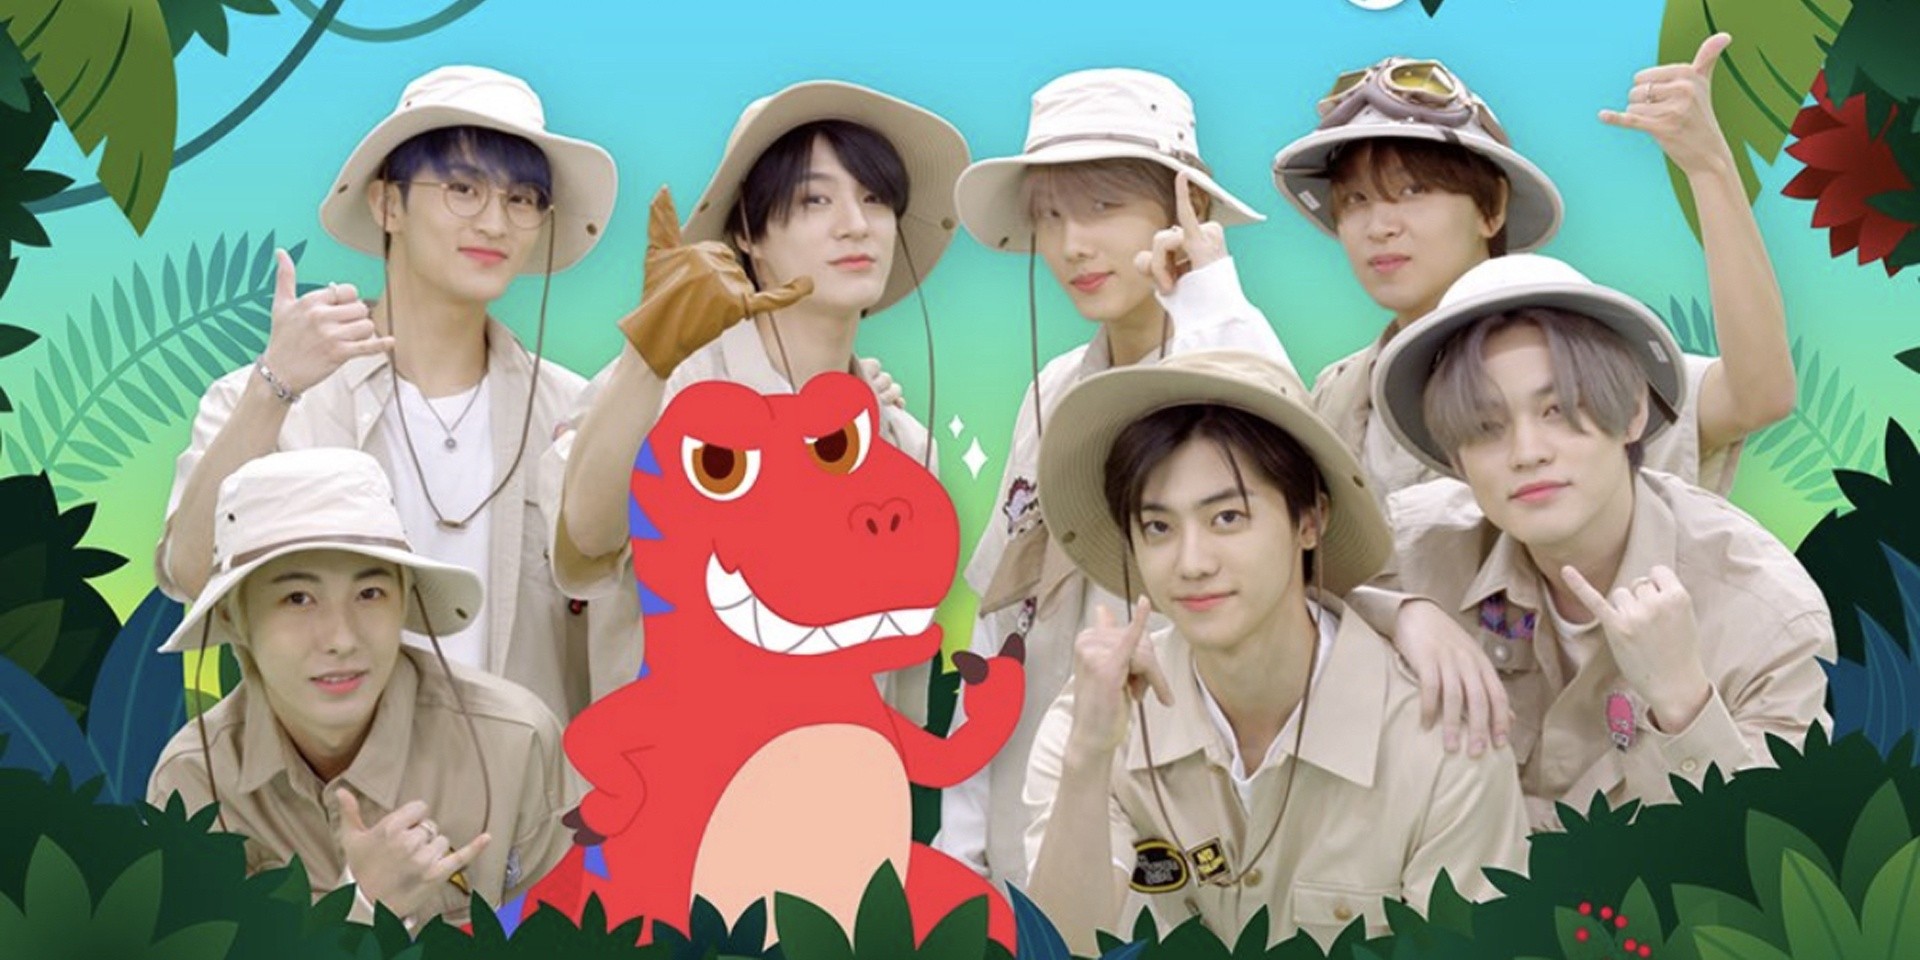 NCT DREAM team up with Pinkfong for new NCT-REX AR filters